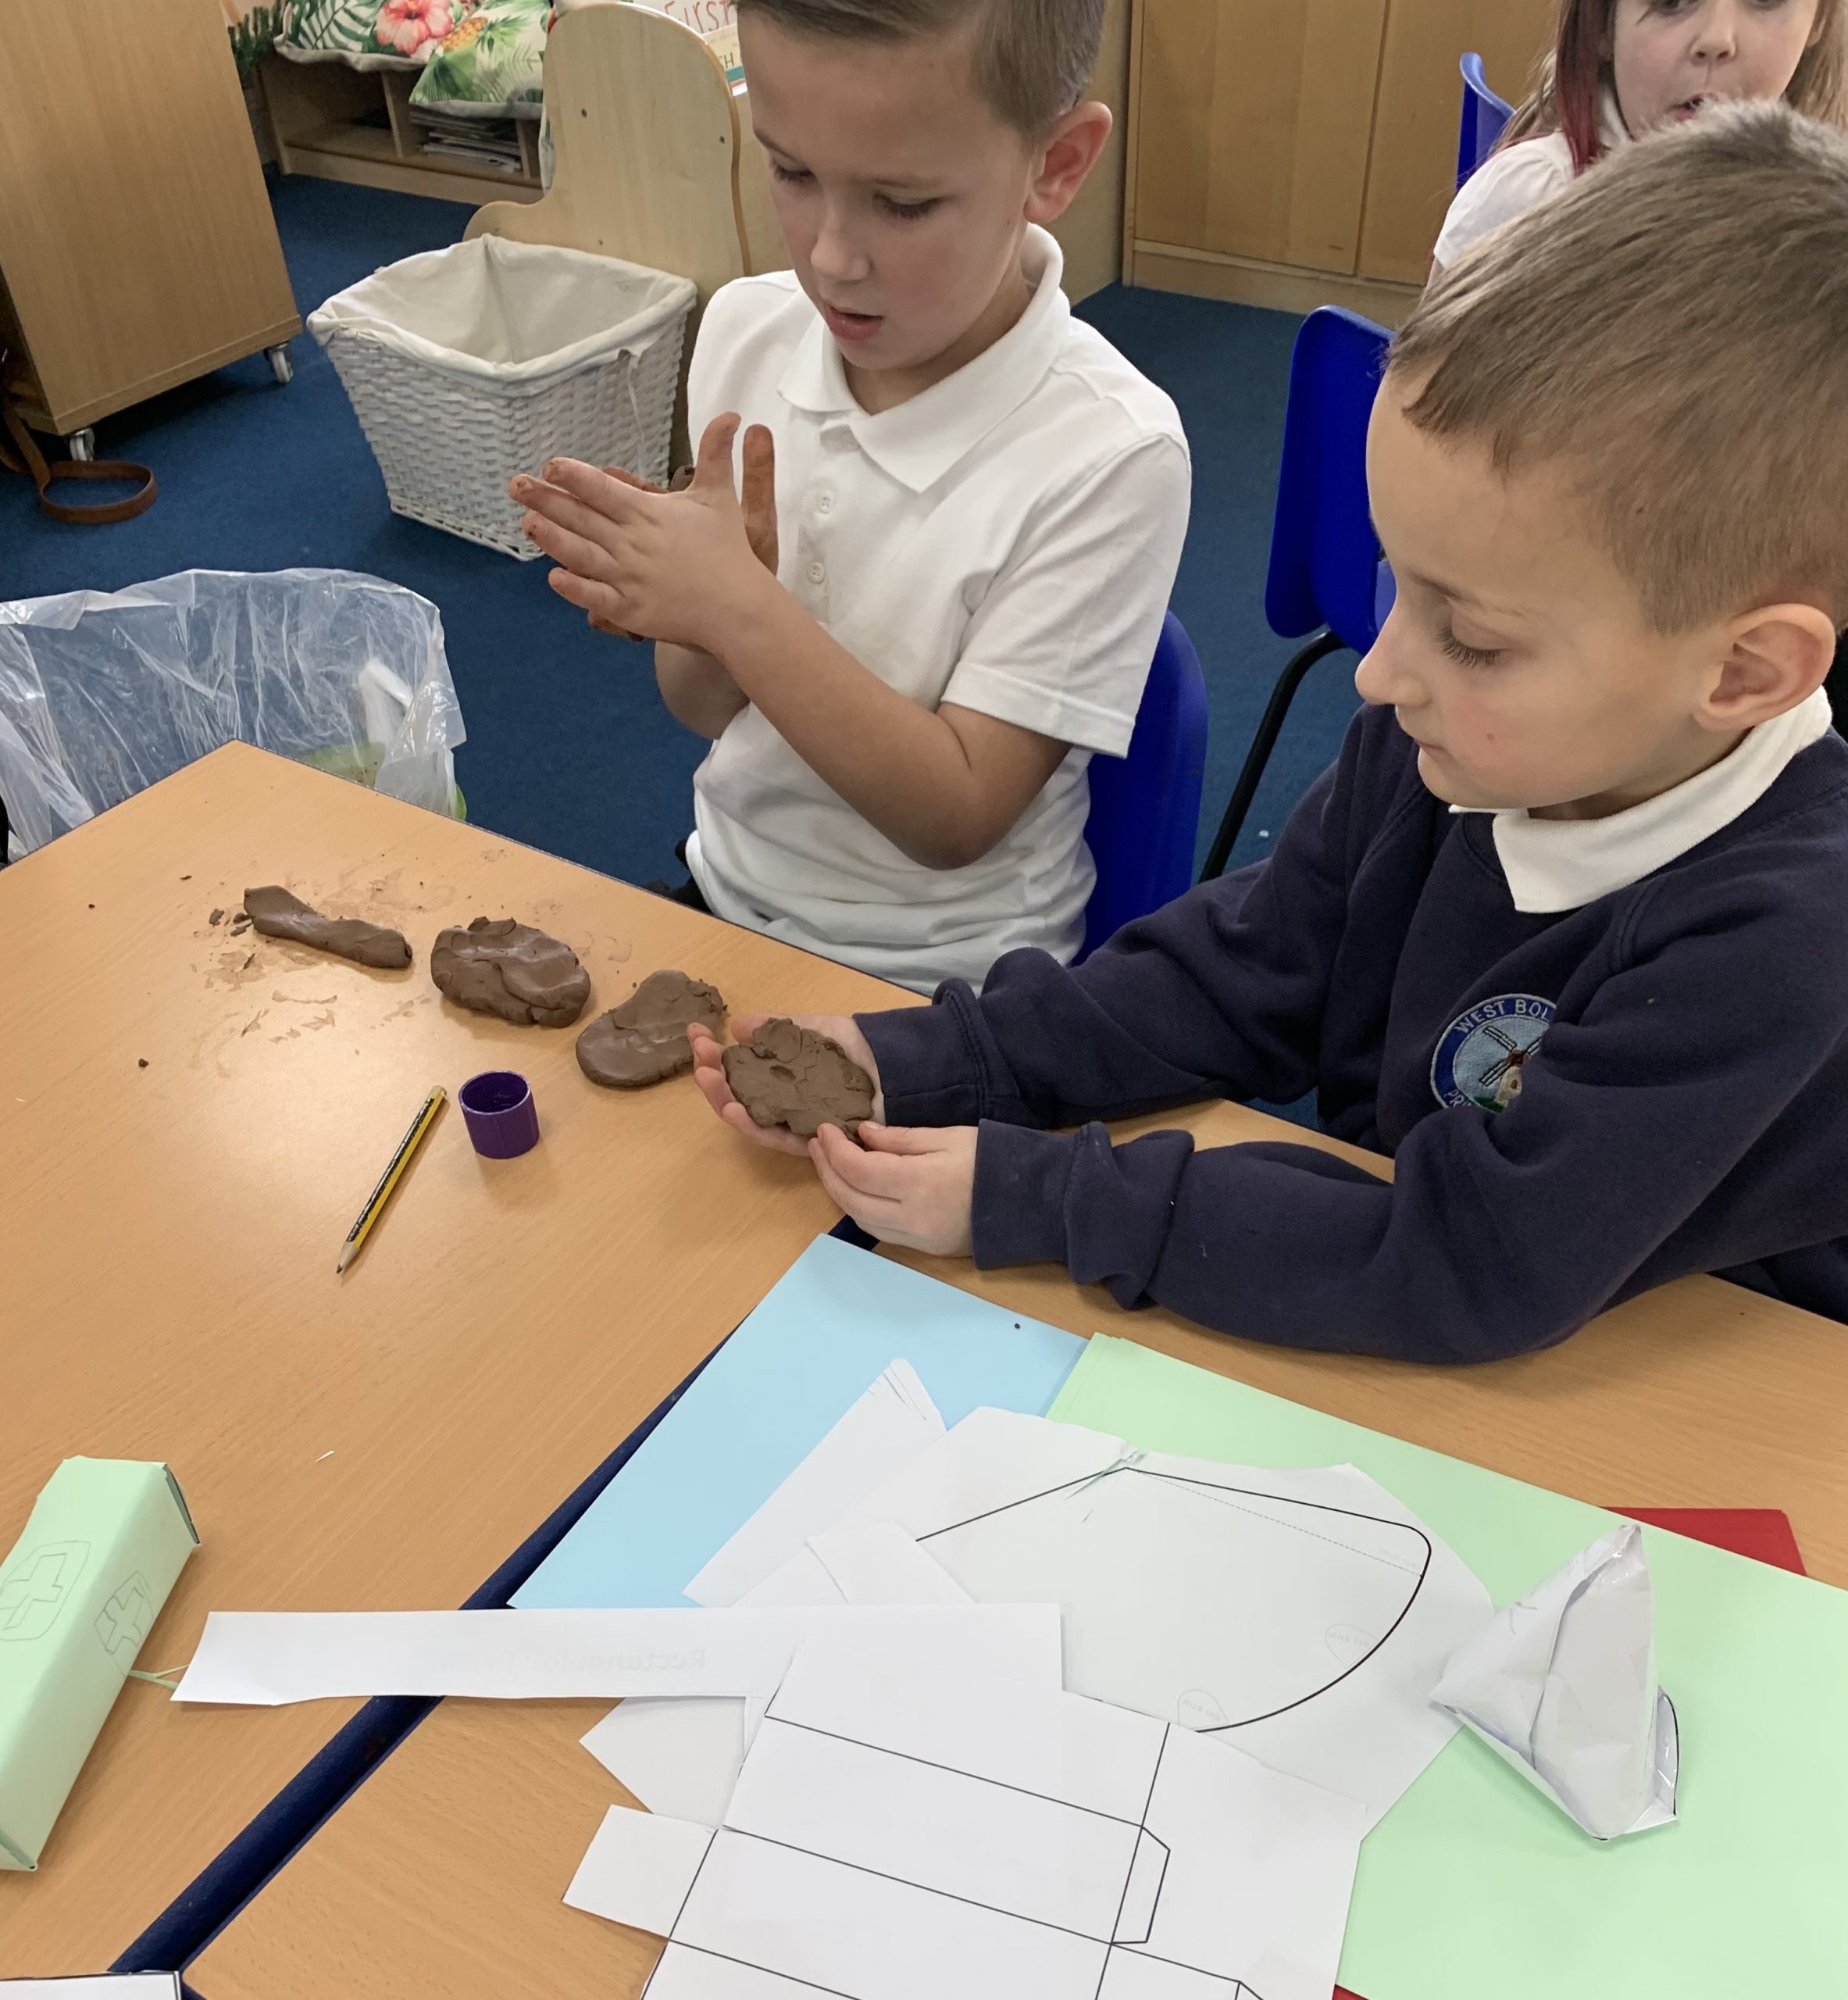 Year 2 children working on their DT projects